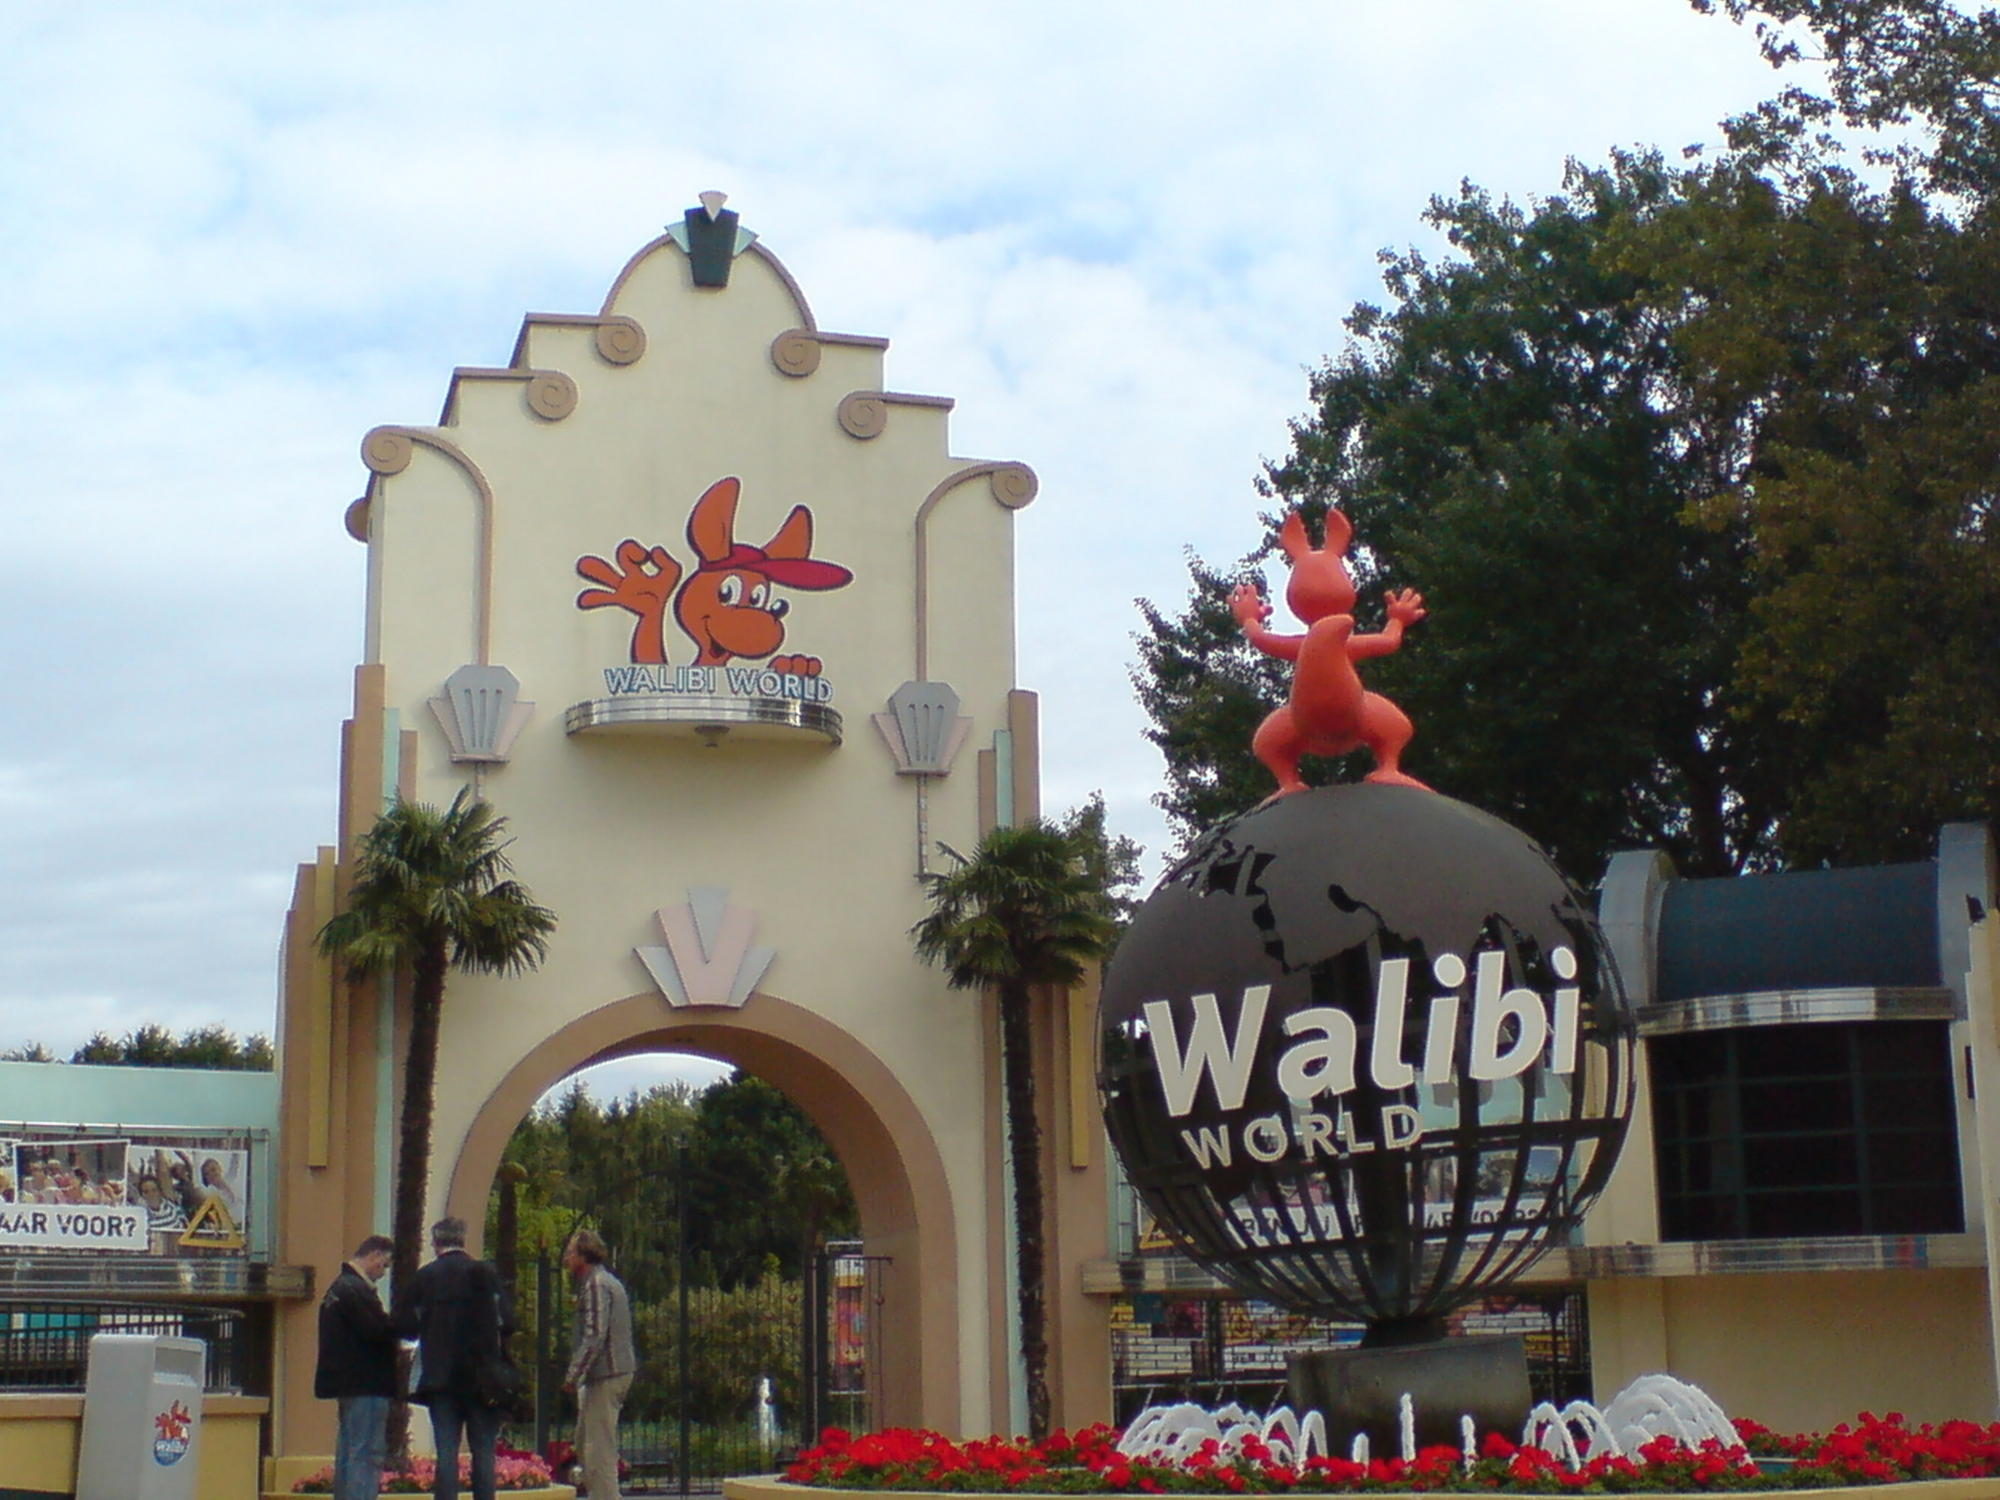 The entry of Walibi World.